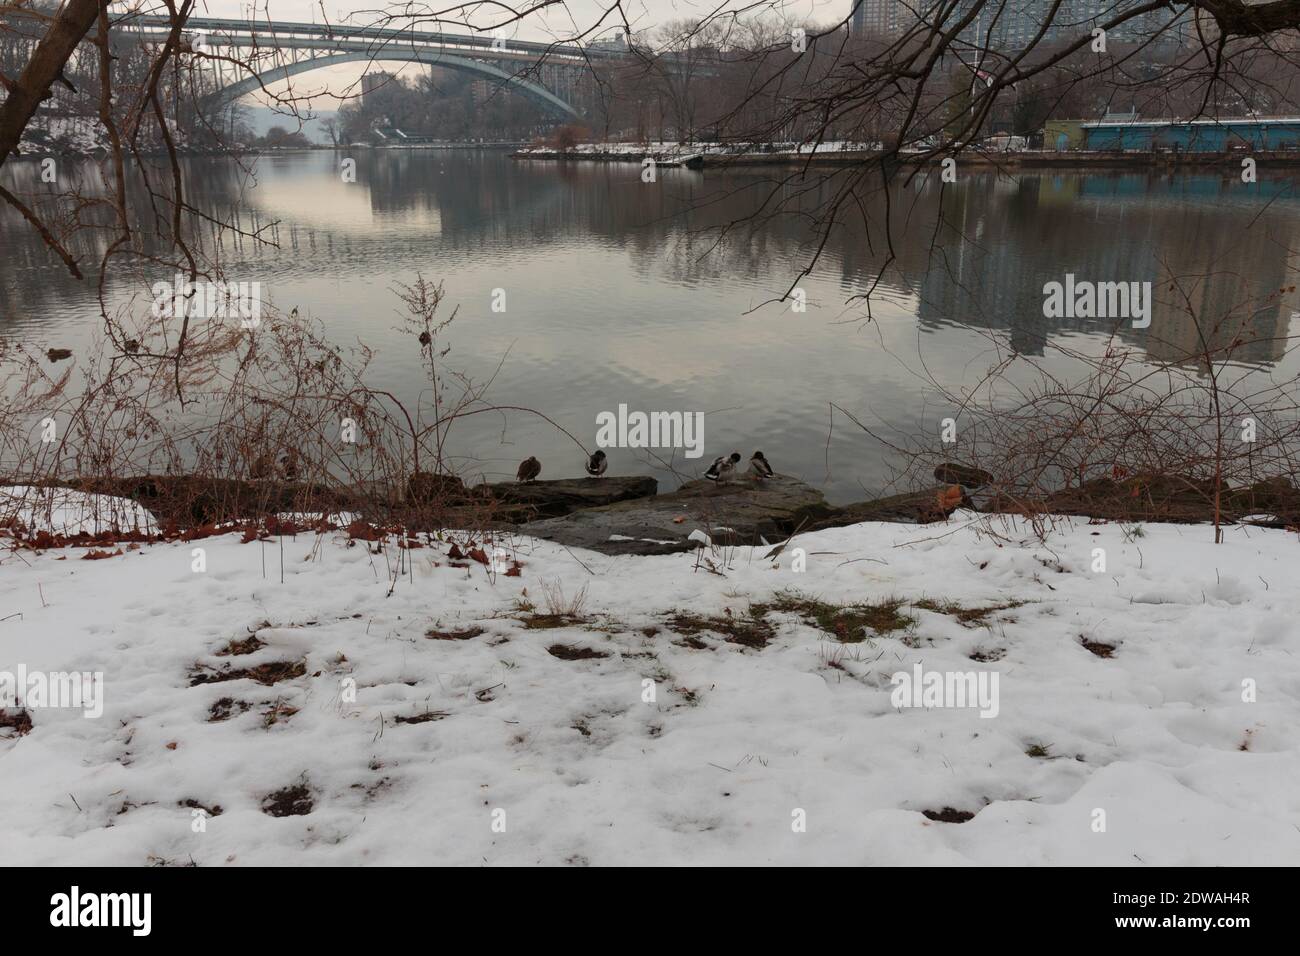 snow covers the ground as ducks sit on rocks on the bank of the salt marsh of Spuyten Duyvil Creek, the Henry Hudson Bridge appears in the background Stock Photo